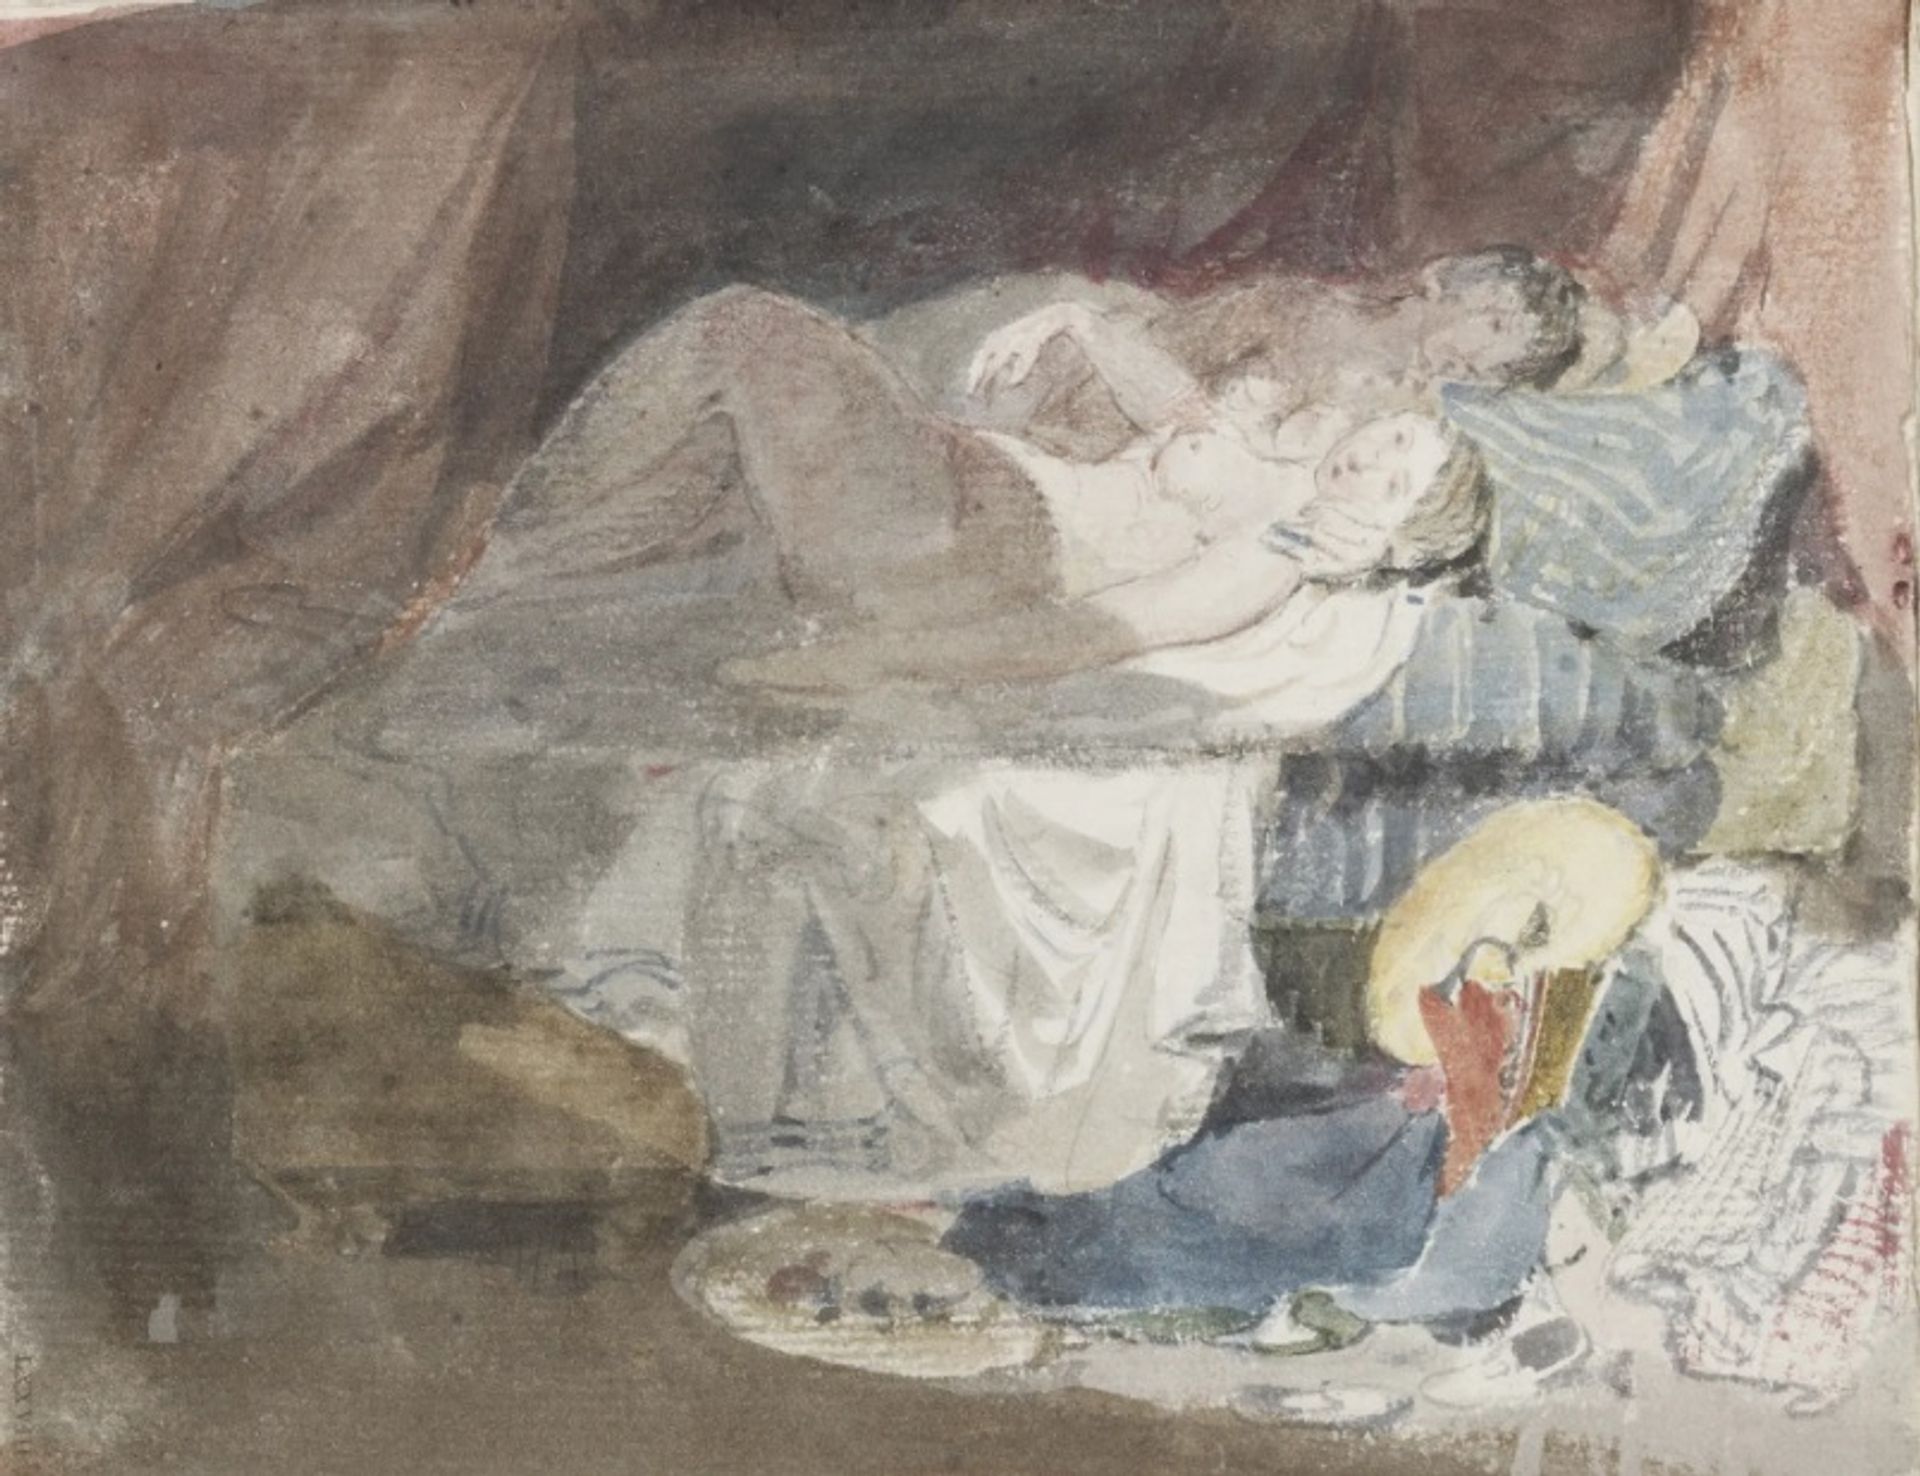 Nude Swiss Girl and a Companion on a Bed (1802) של JMW טרנר

© Tate / Tate Images